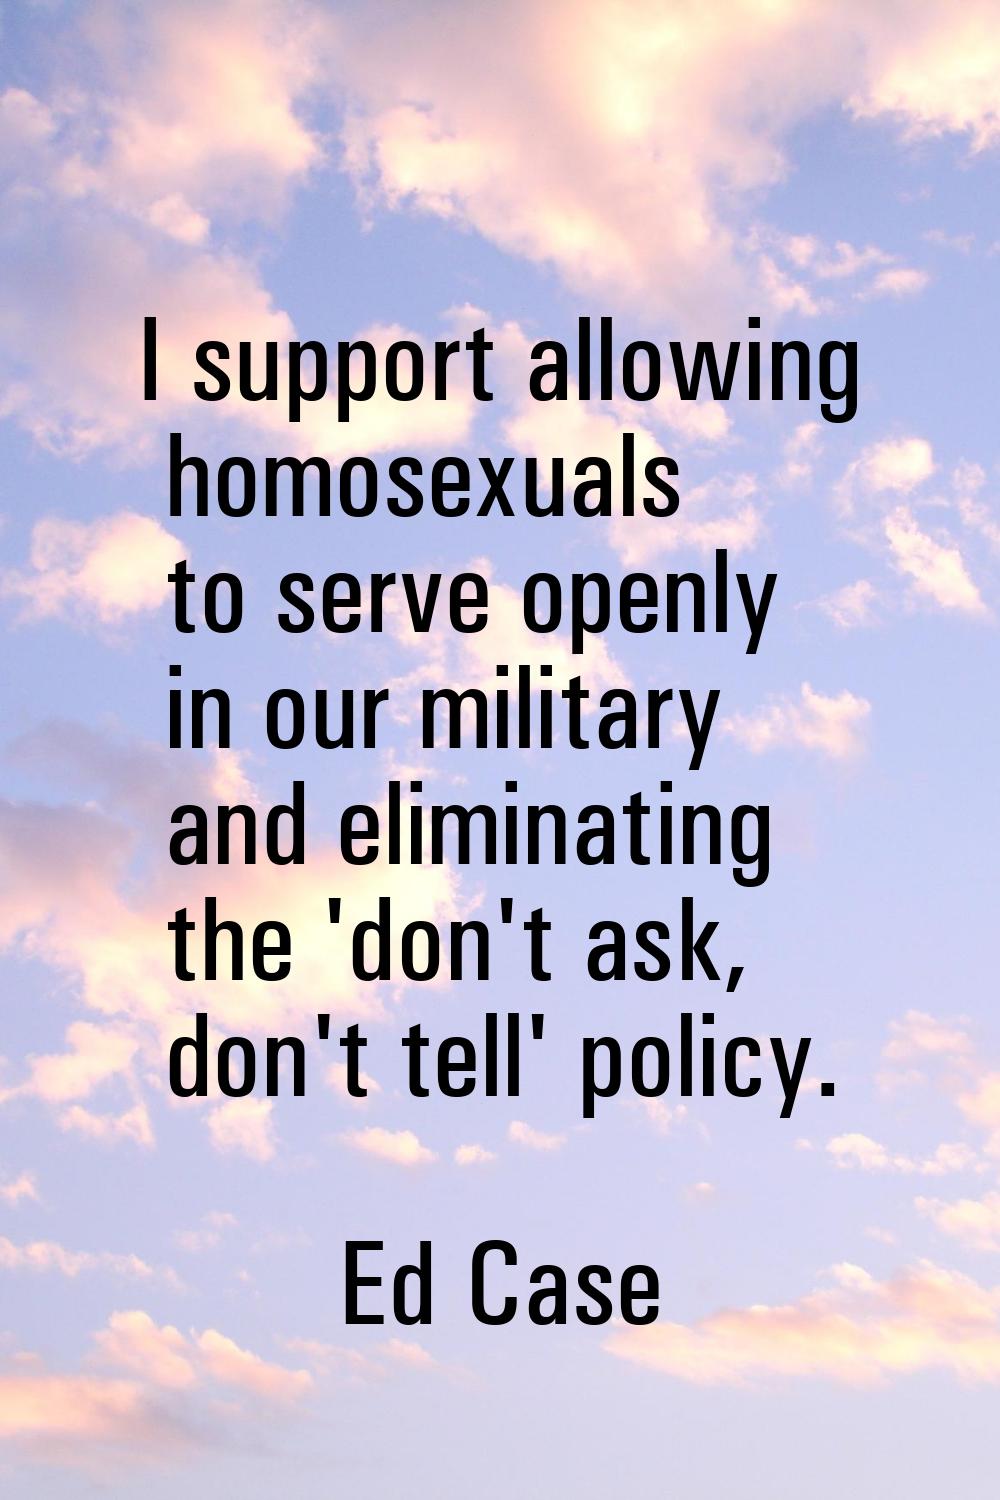 I support allowing homosexuals to serve openly in our military and eliminating the 'don't ask, don'